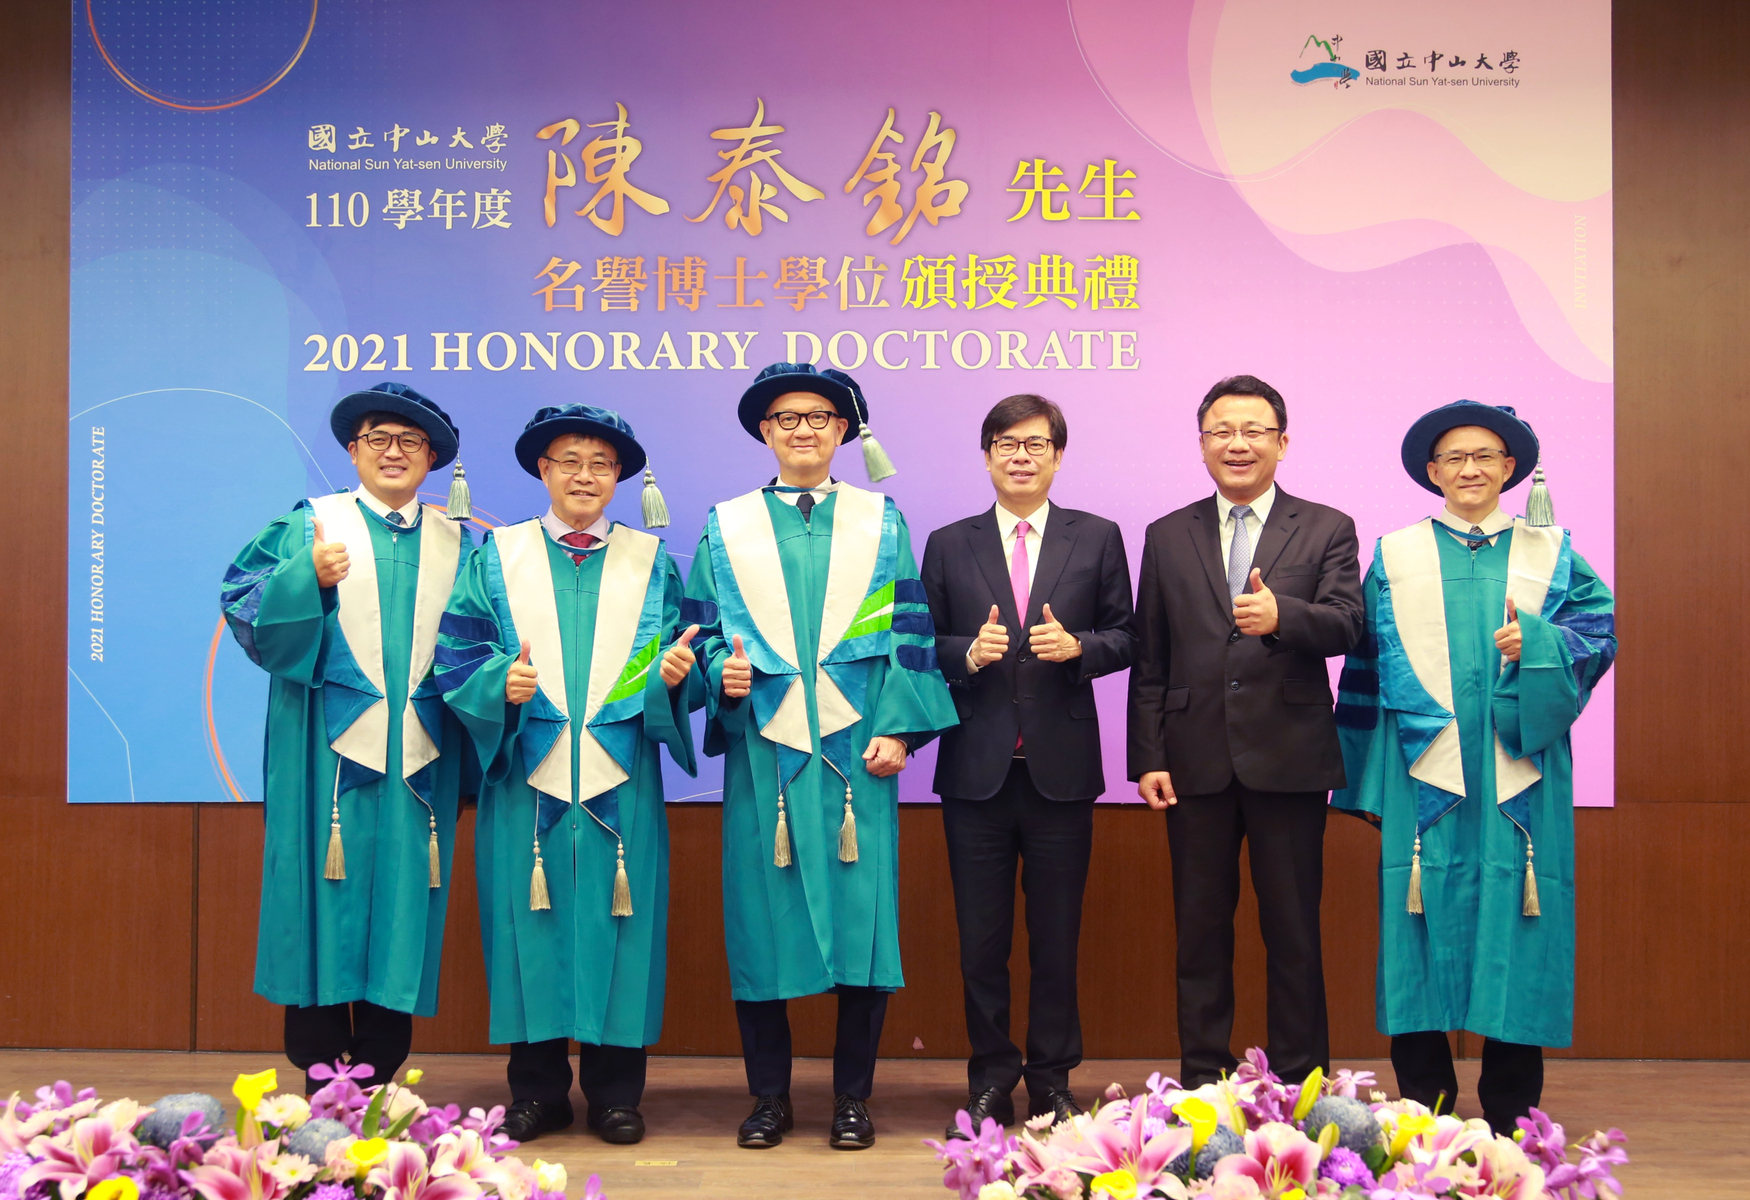 Chairman of Yageo Corporation Tie-Min Chen (third from the left) was conferred the Honorary Doctorate in Management. Mayor of Kaohsiung Chen Chi-Mai (third from the right) participated in the ceremony.